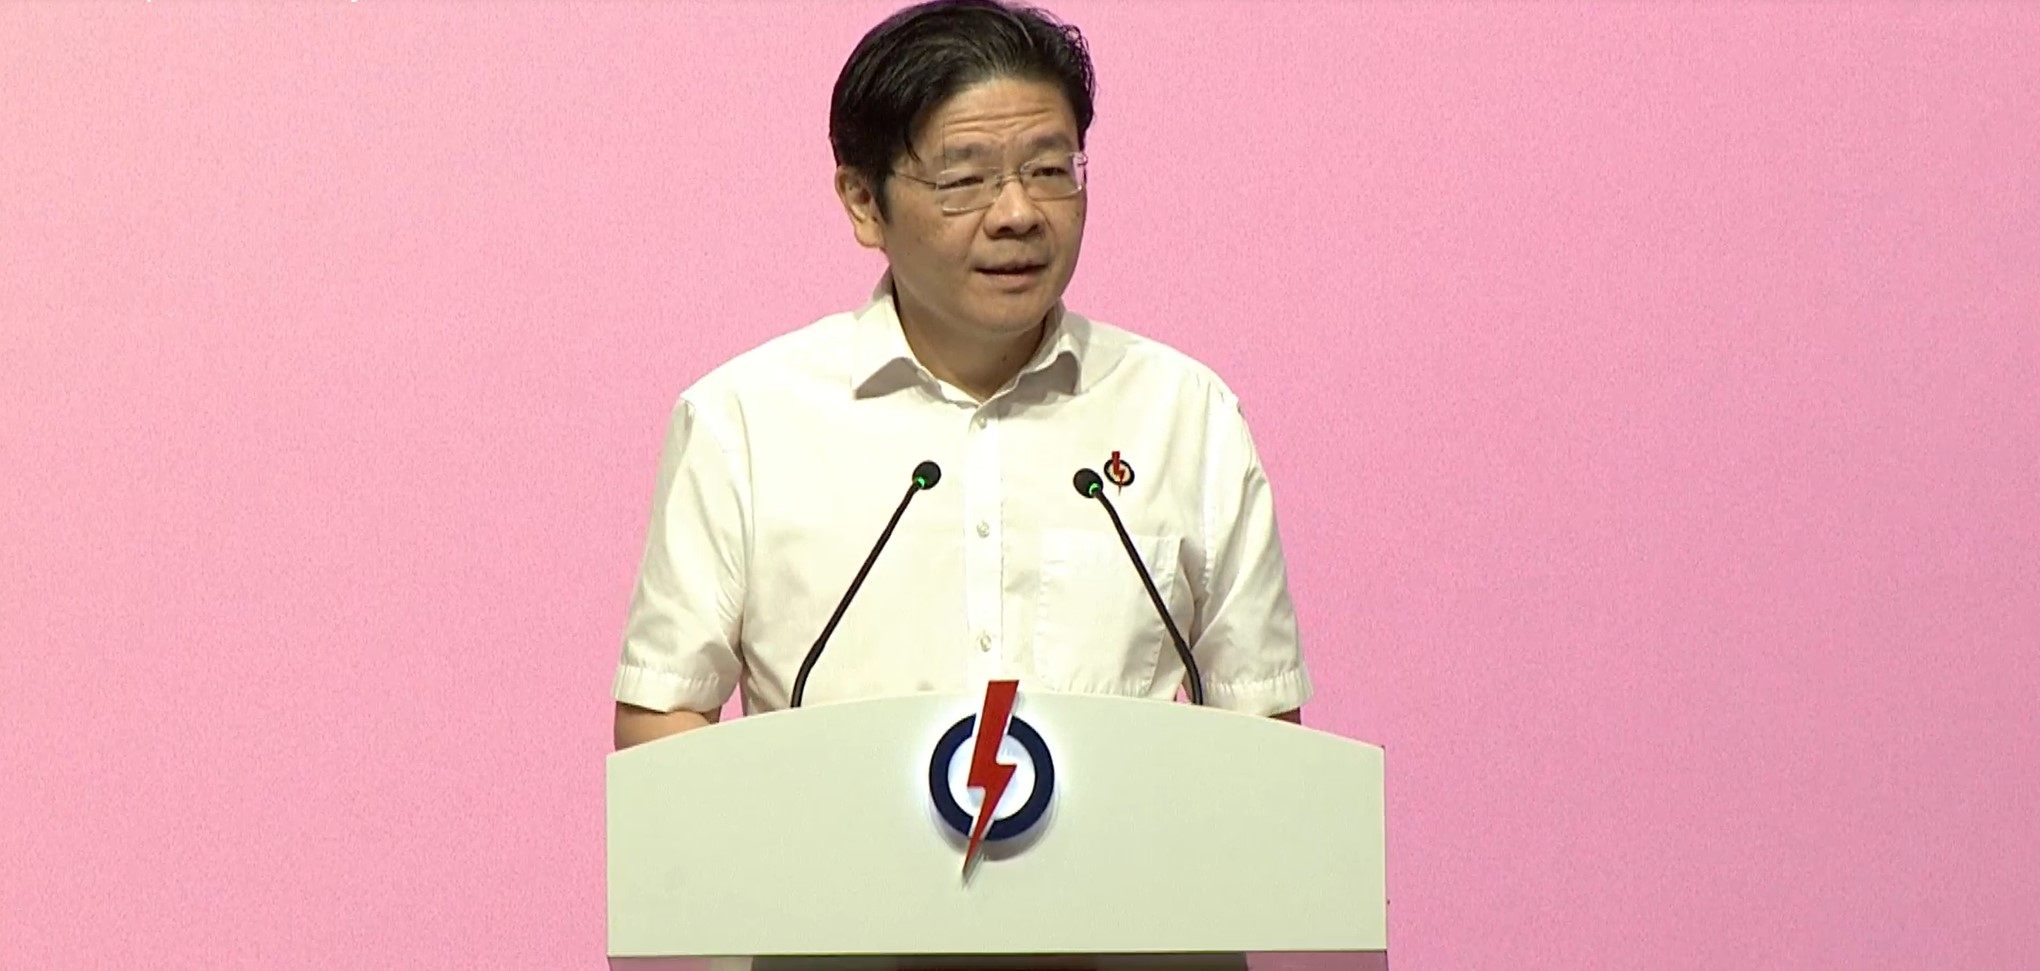 Deputy Prime Minister Lawrence Wong speaks at a PAP convention on Sunday. Photo: PAP/Facebook